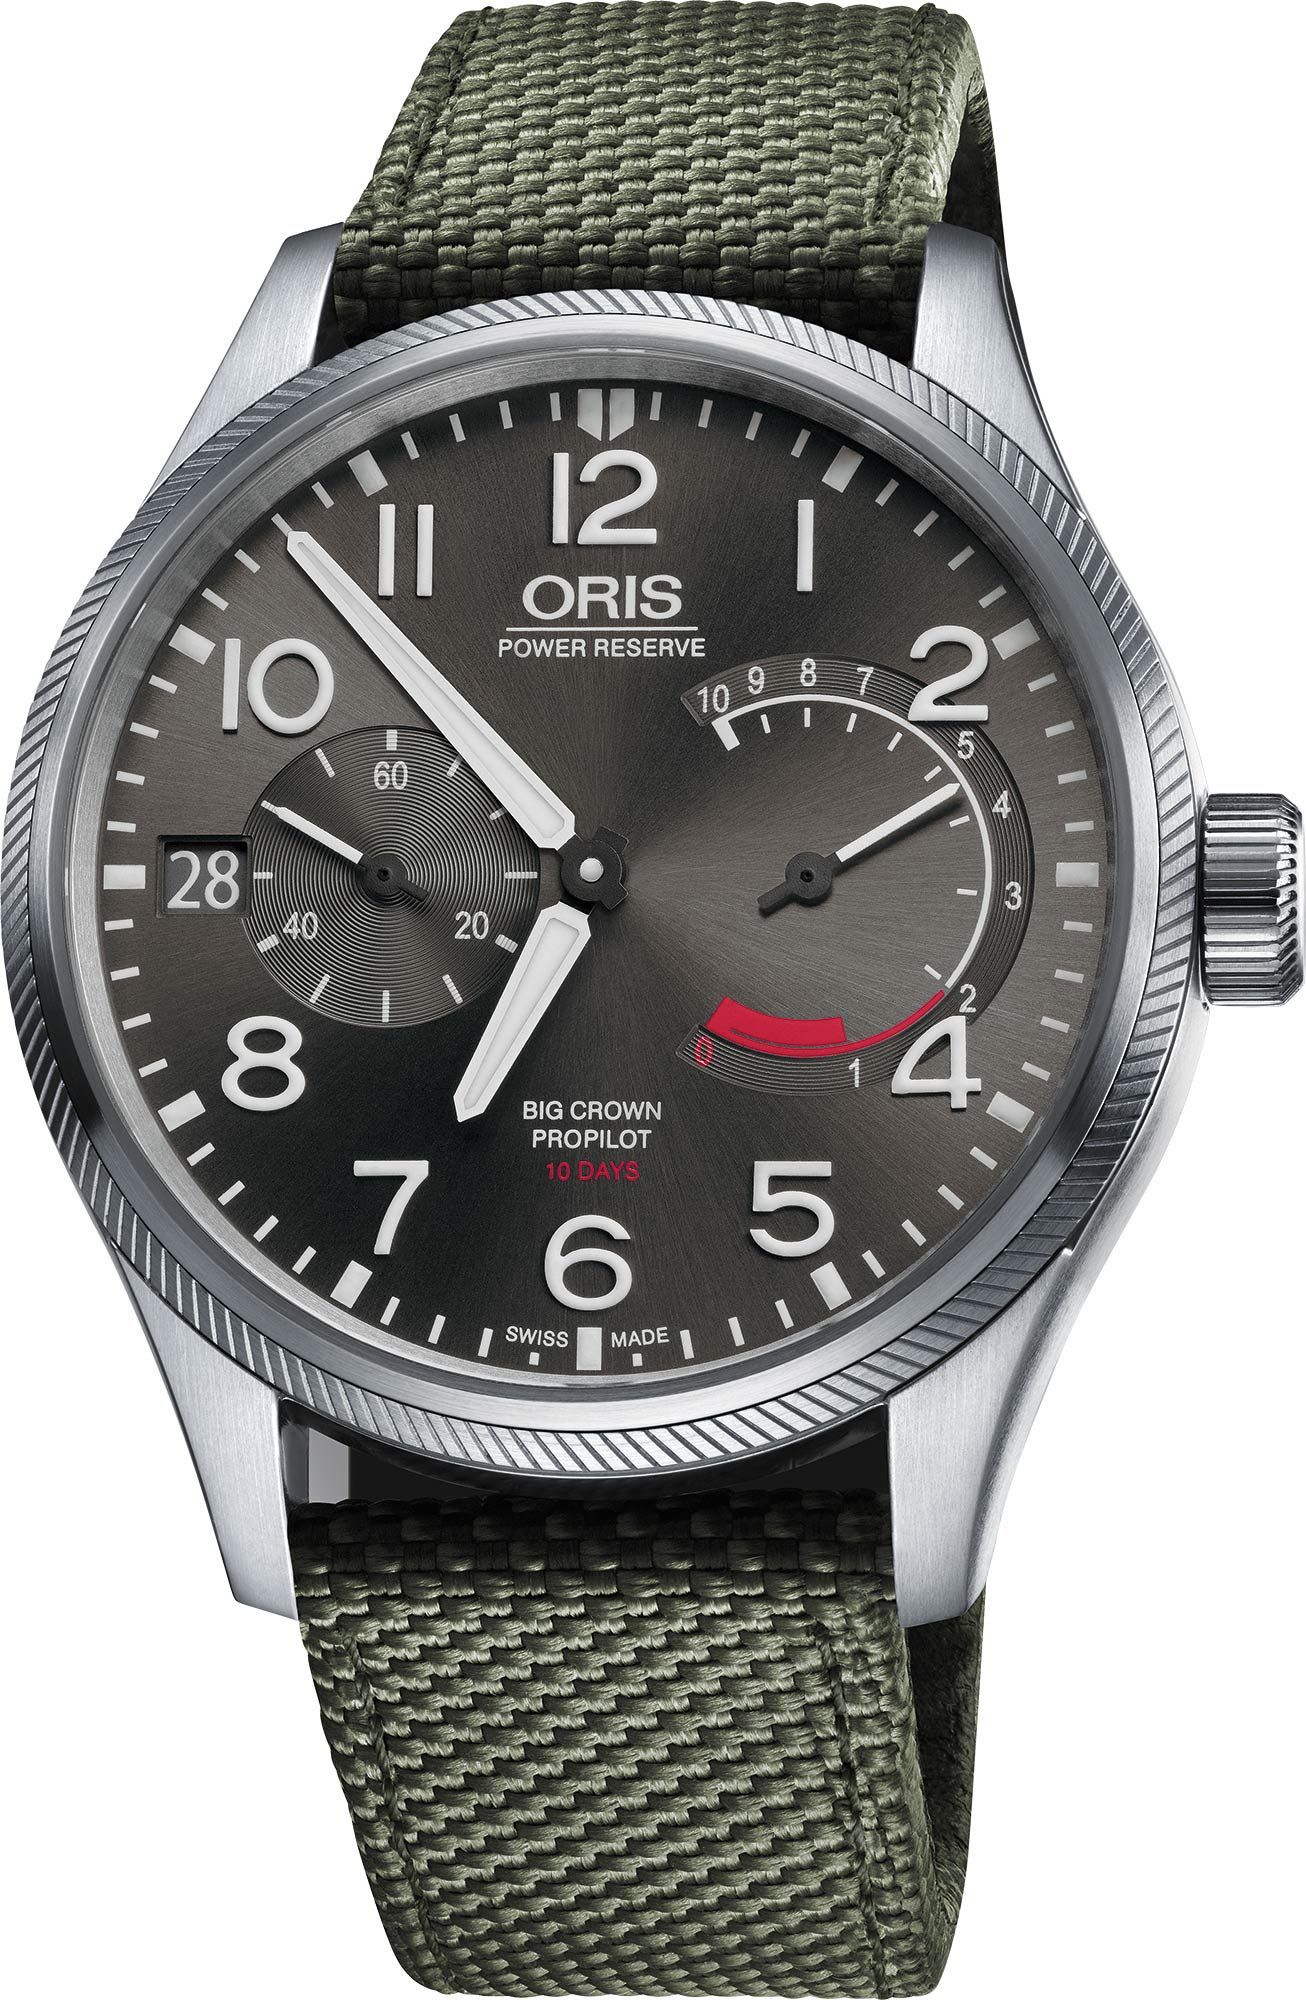 Oris Big Crown Calibre 111 44 mm Watch in Anthracite Dial For Men - 1